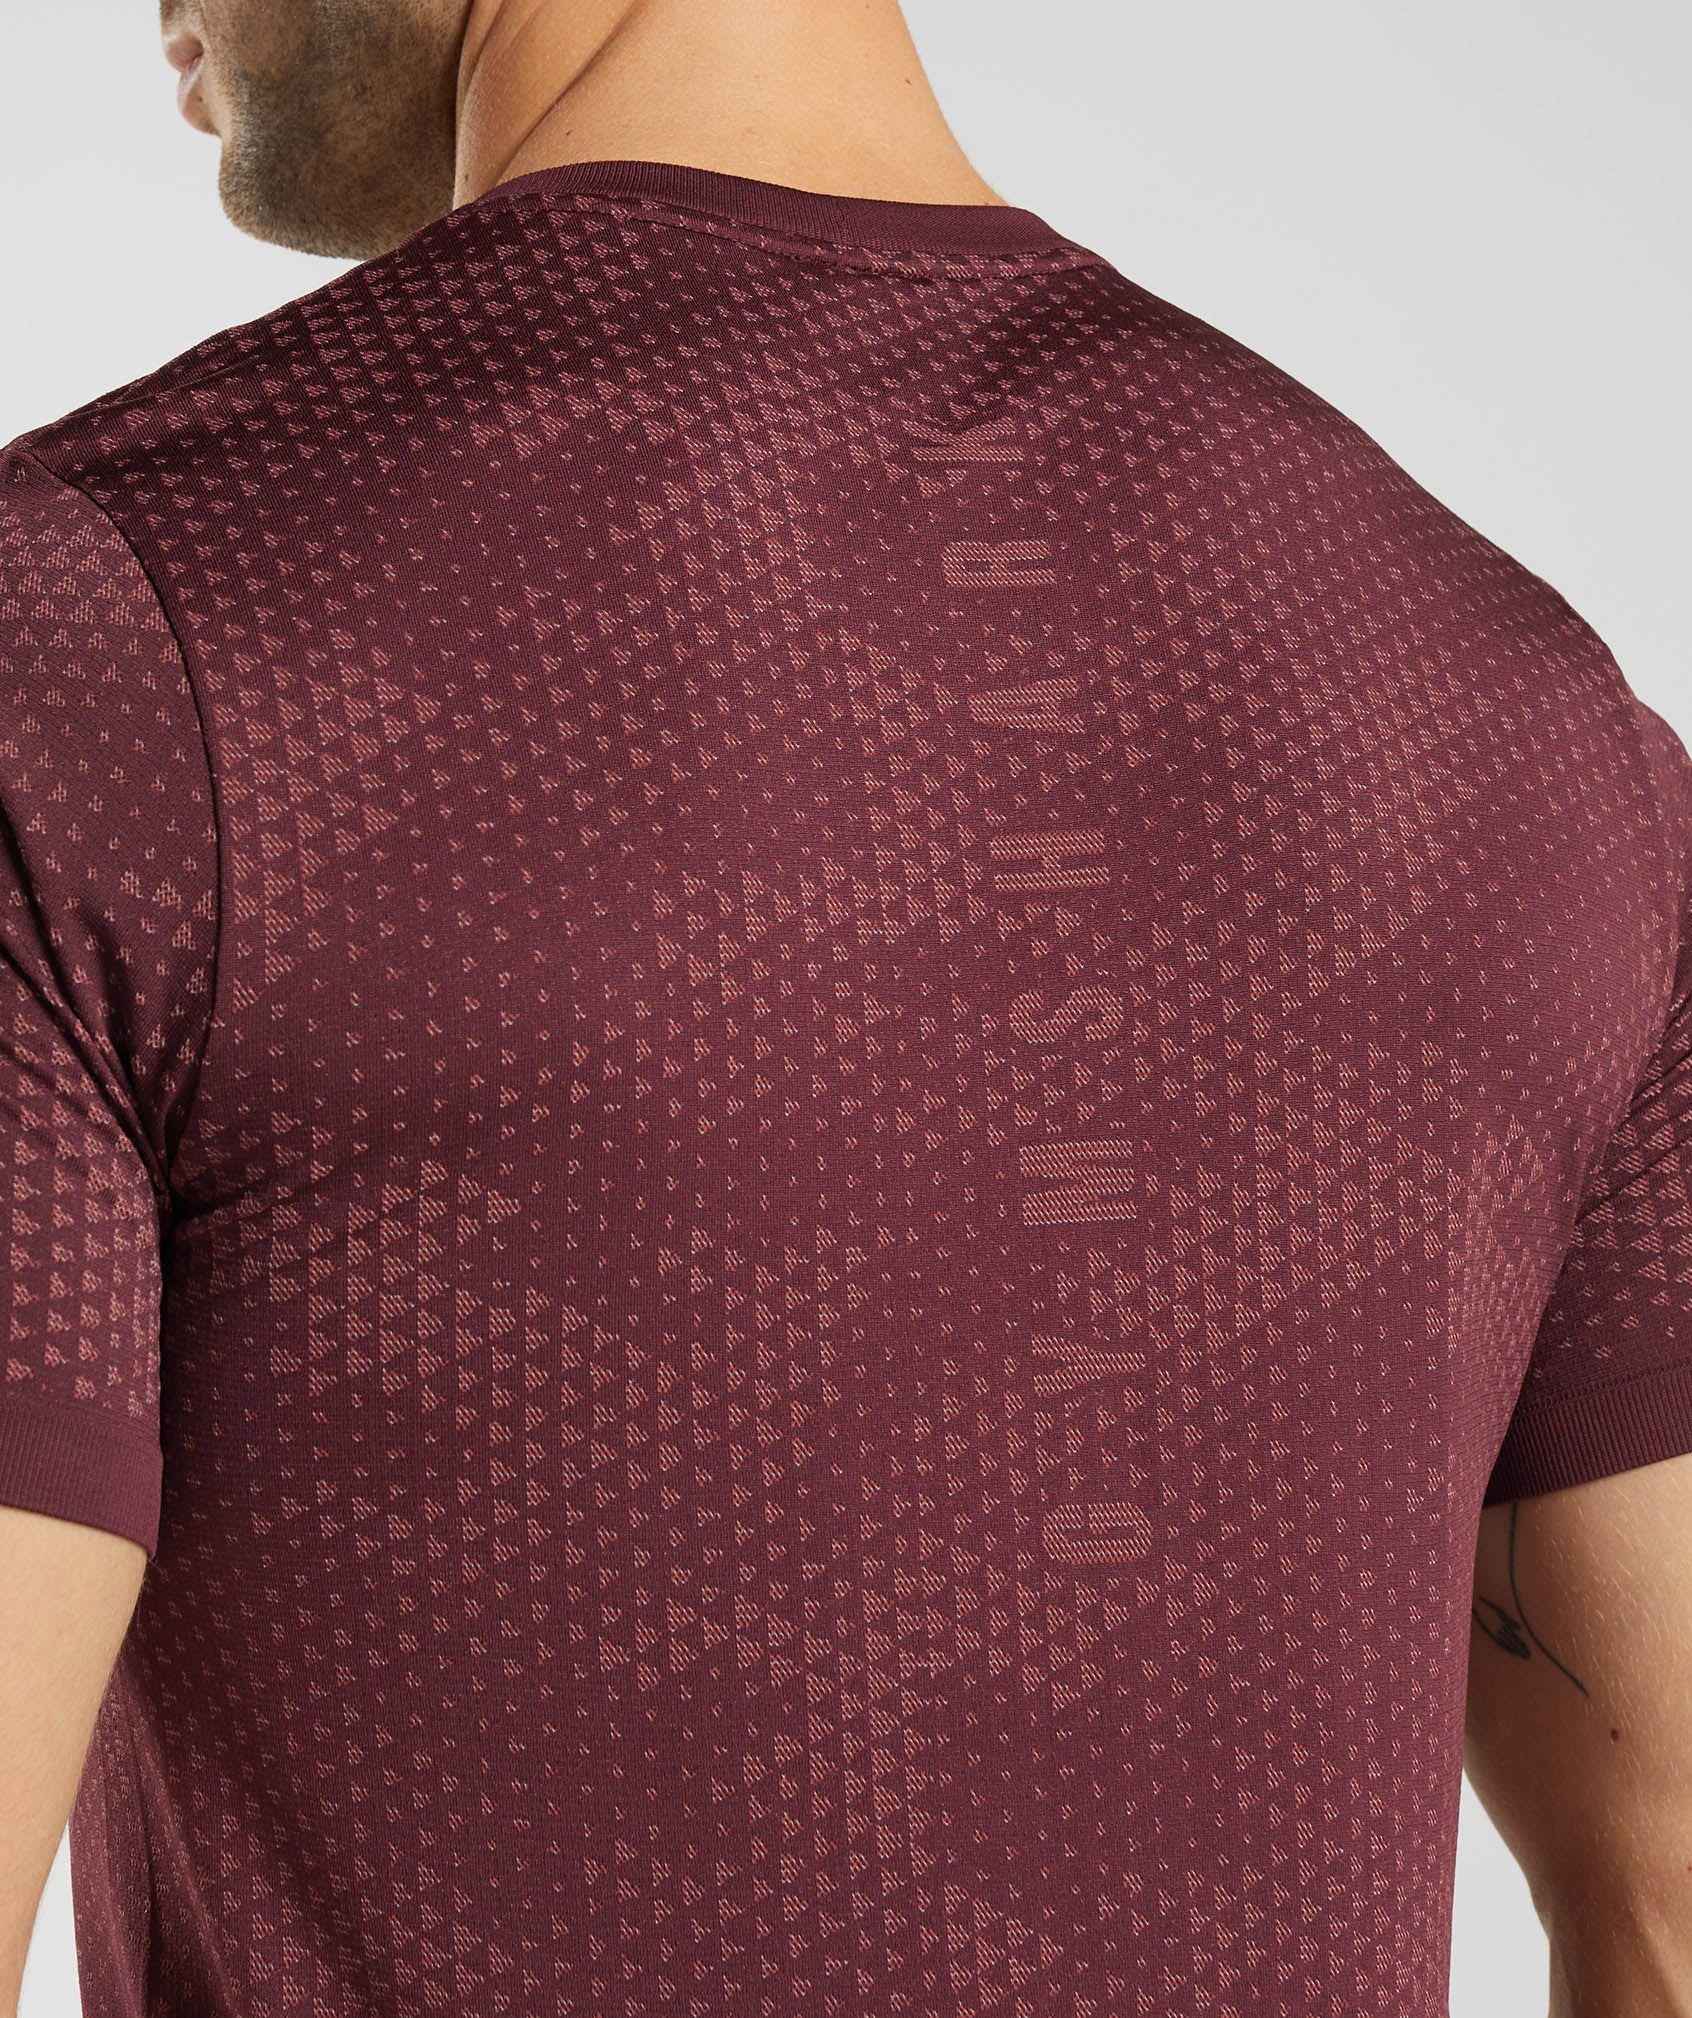 Sport Seamless T-Shirt in Baked Maroon/Rosewood Red